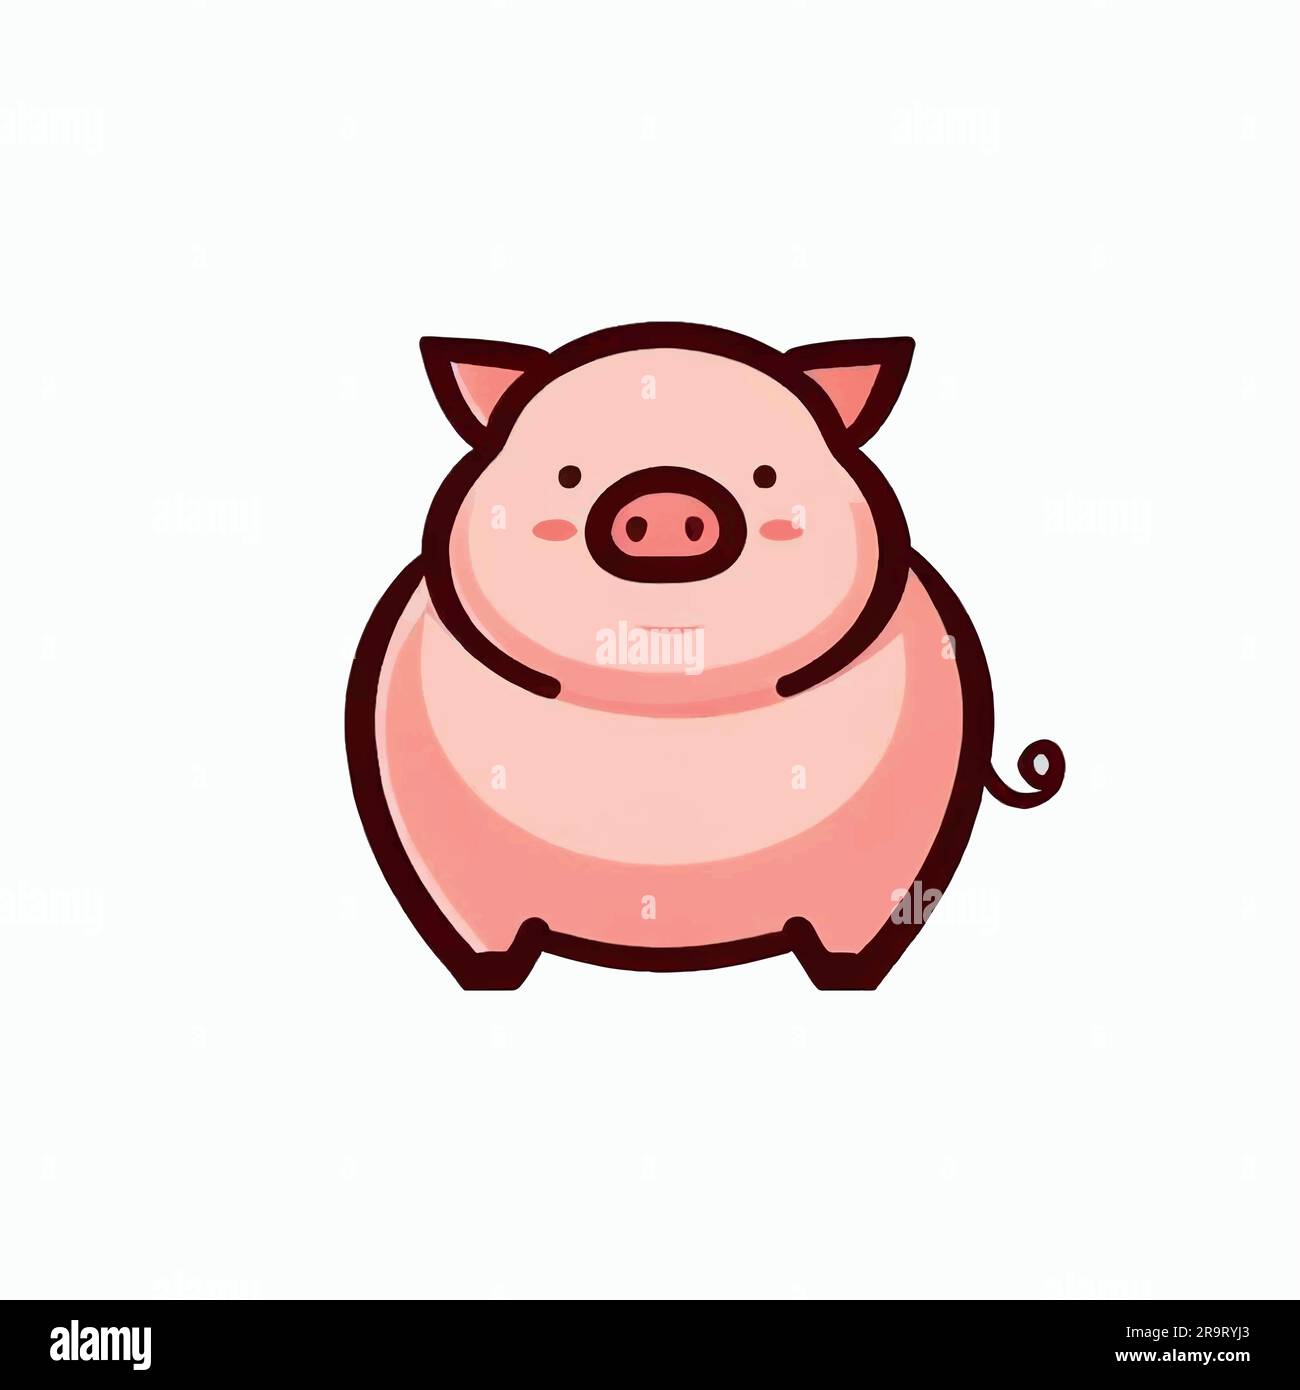 natural pig illustration from the front on a white background Stock Vector